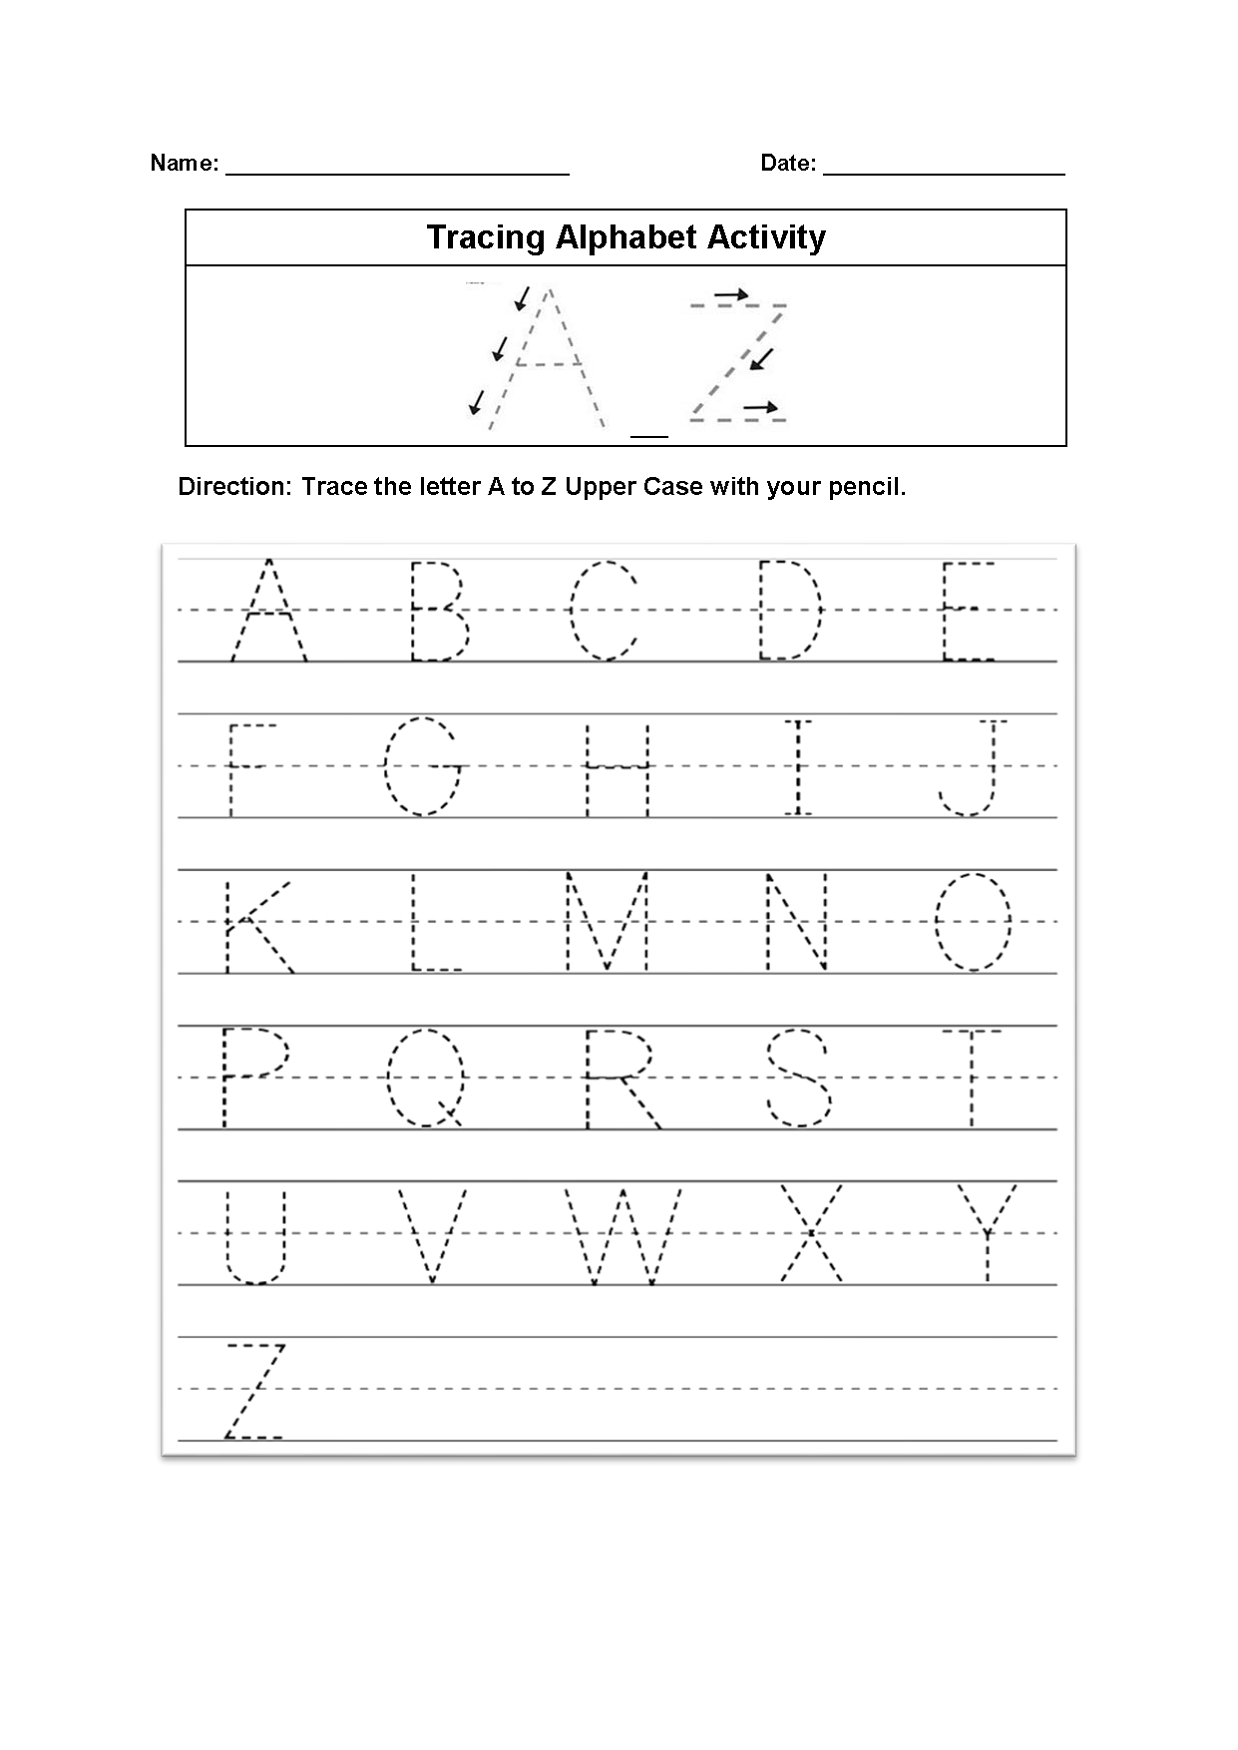 Tracing Alphabet Worksheets – Kids Learning Activity with Alphabet Activity Worksheets